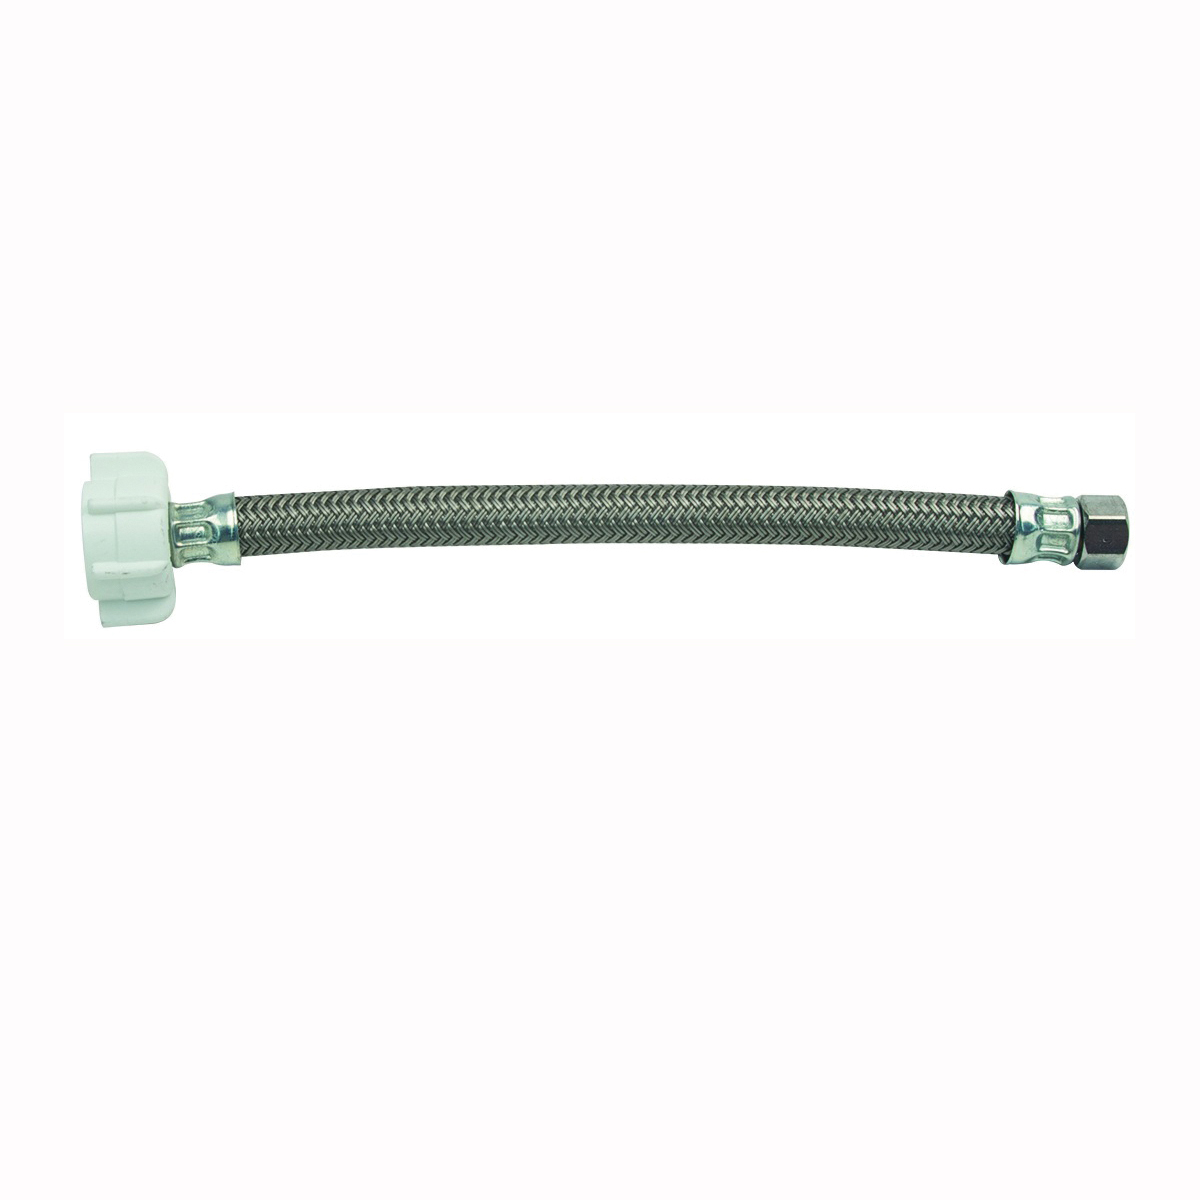 PSB855 Toilet Connector, 3/8 in Inlet, Compression Inlet, 7/8 in Outlet, Ballcock Outlet, Stainless Steel, 9 in L